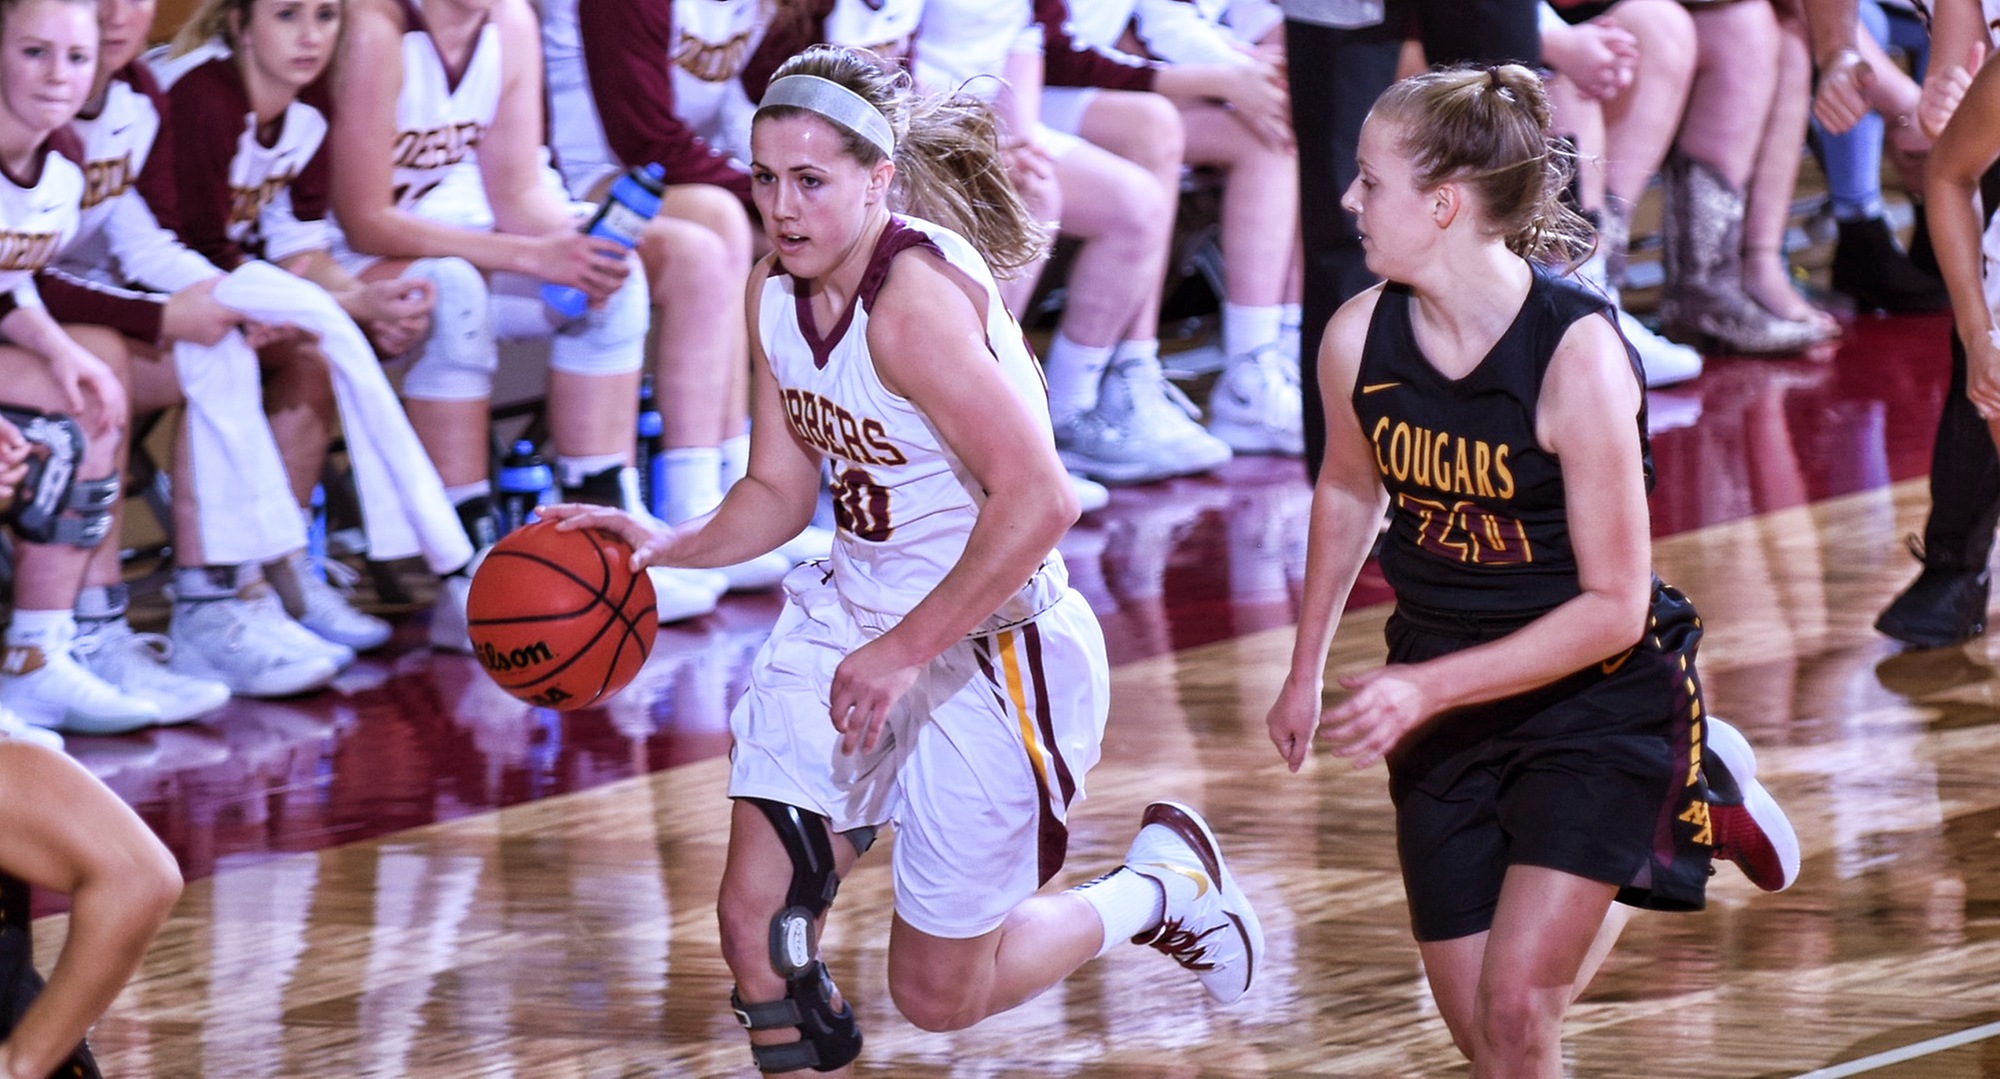 Freshman Emily Beseman brings the ball up the court against a Minn.-Morris defender during the Cobbers' 78-63 win. Beseman finished with 23 points in her college debut.